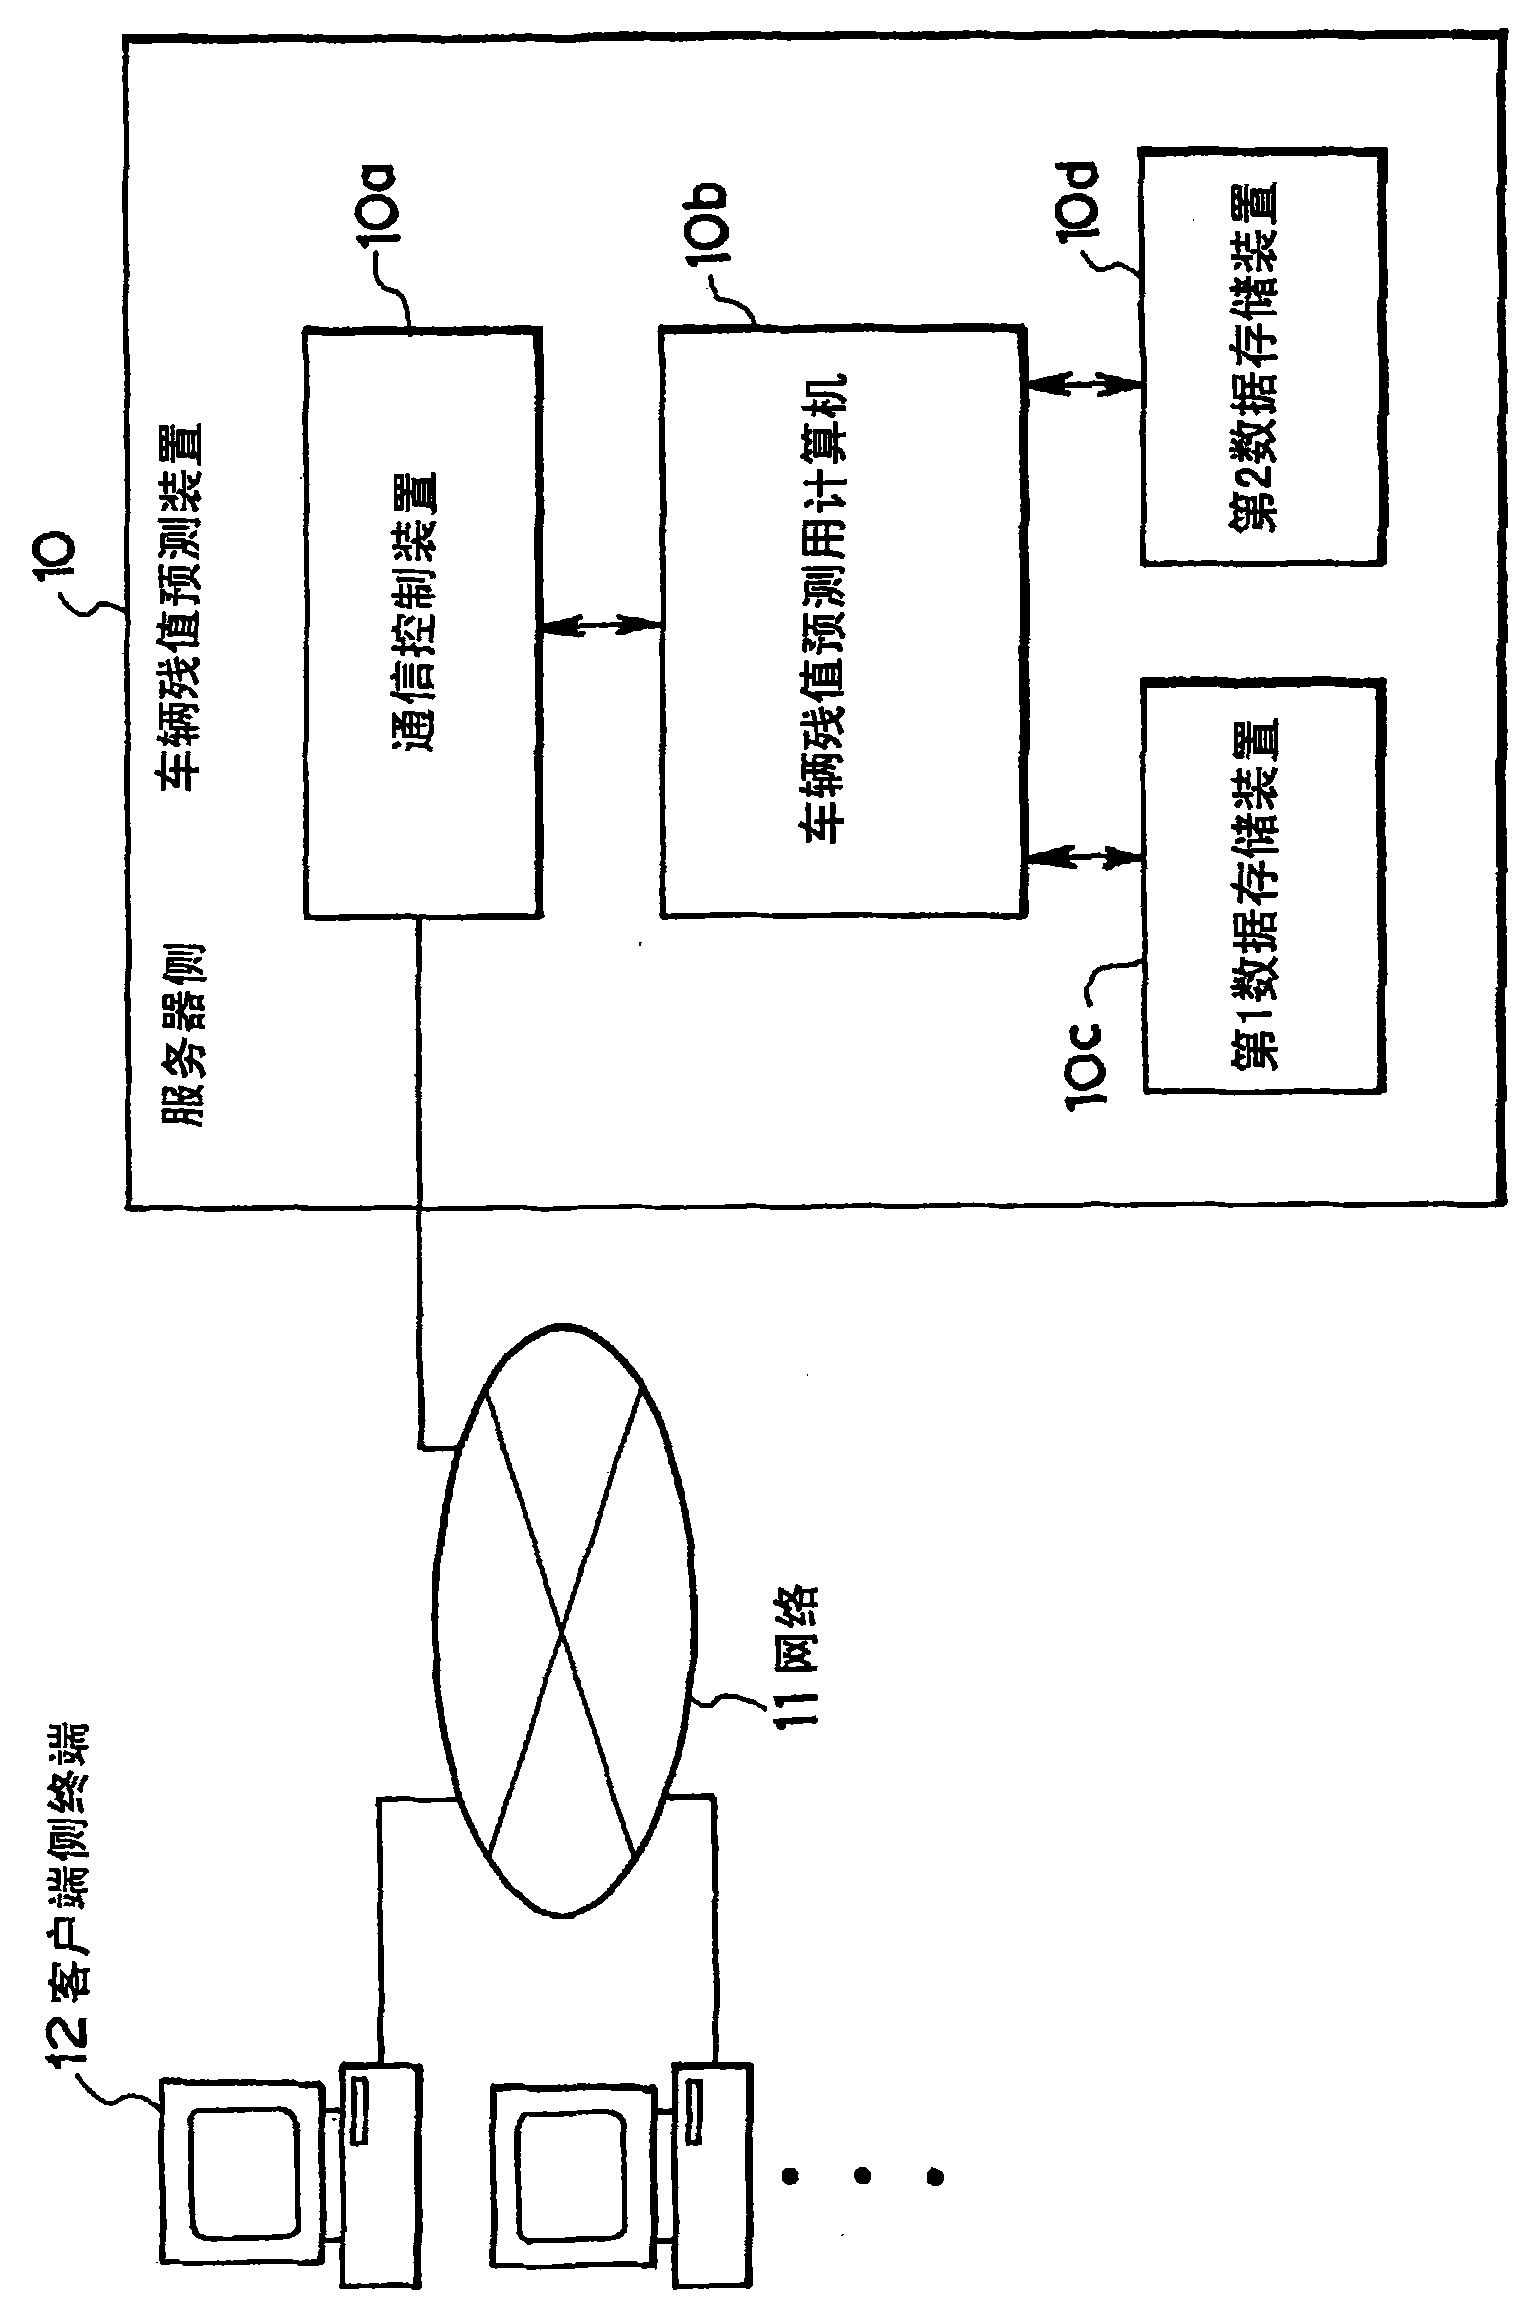 Article residual value predicting device